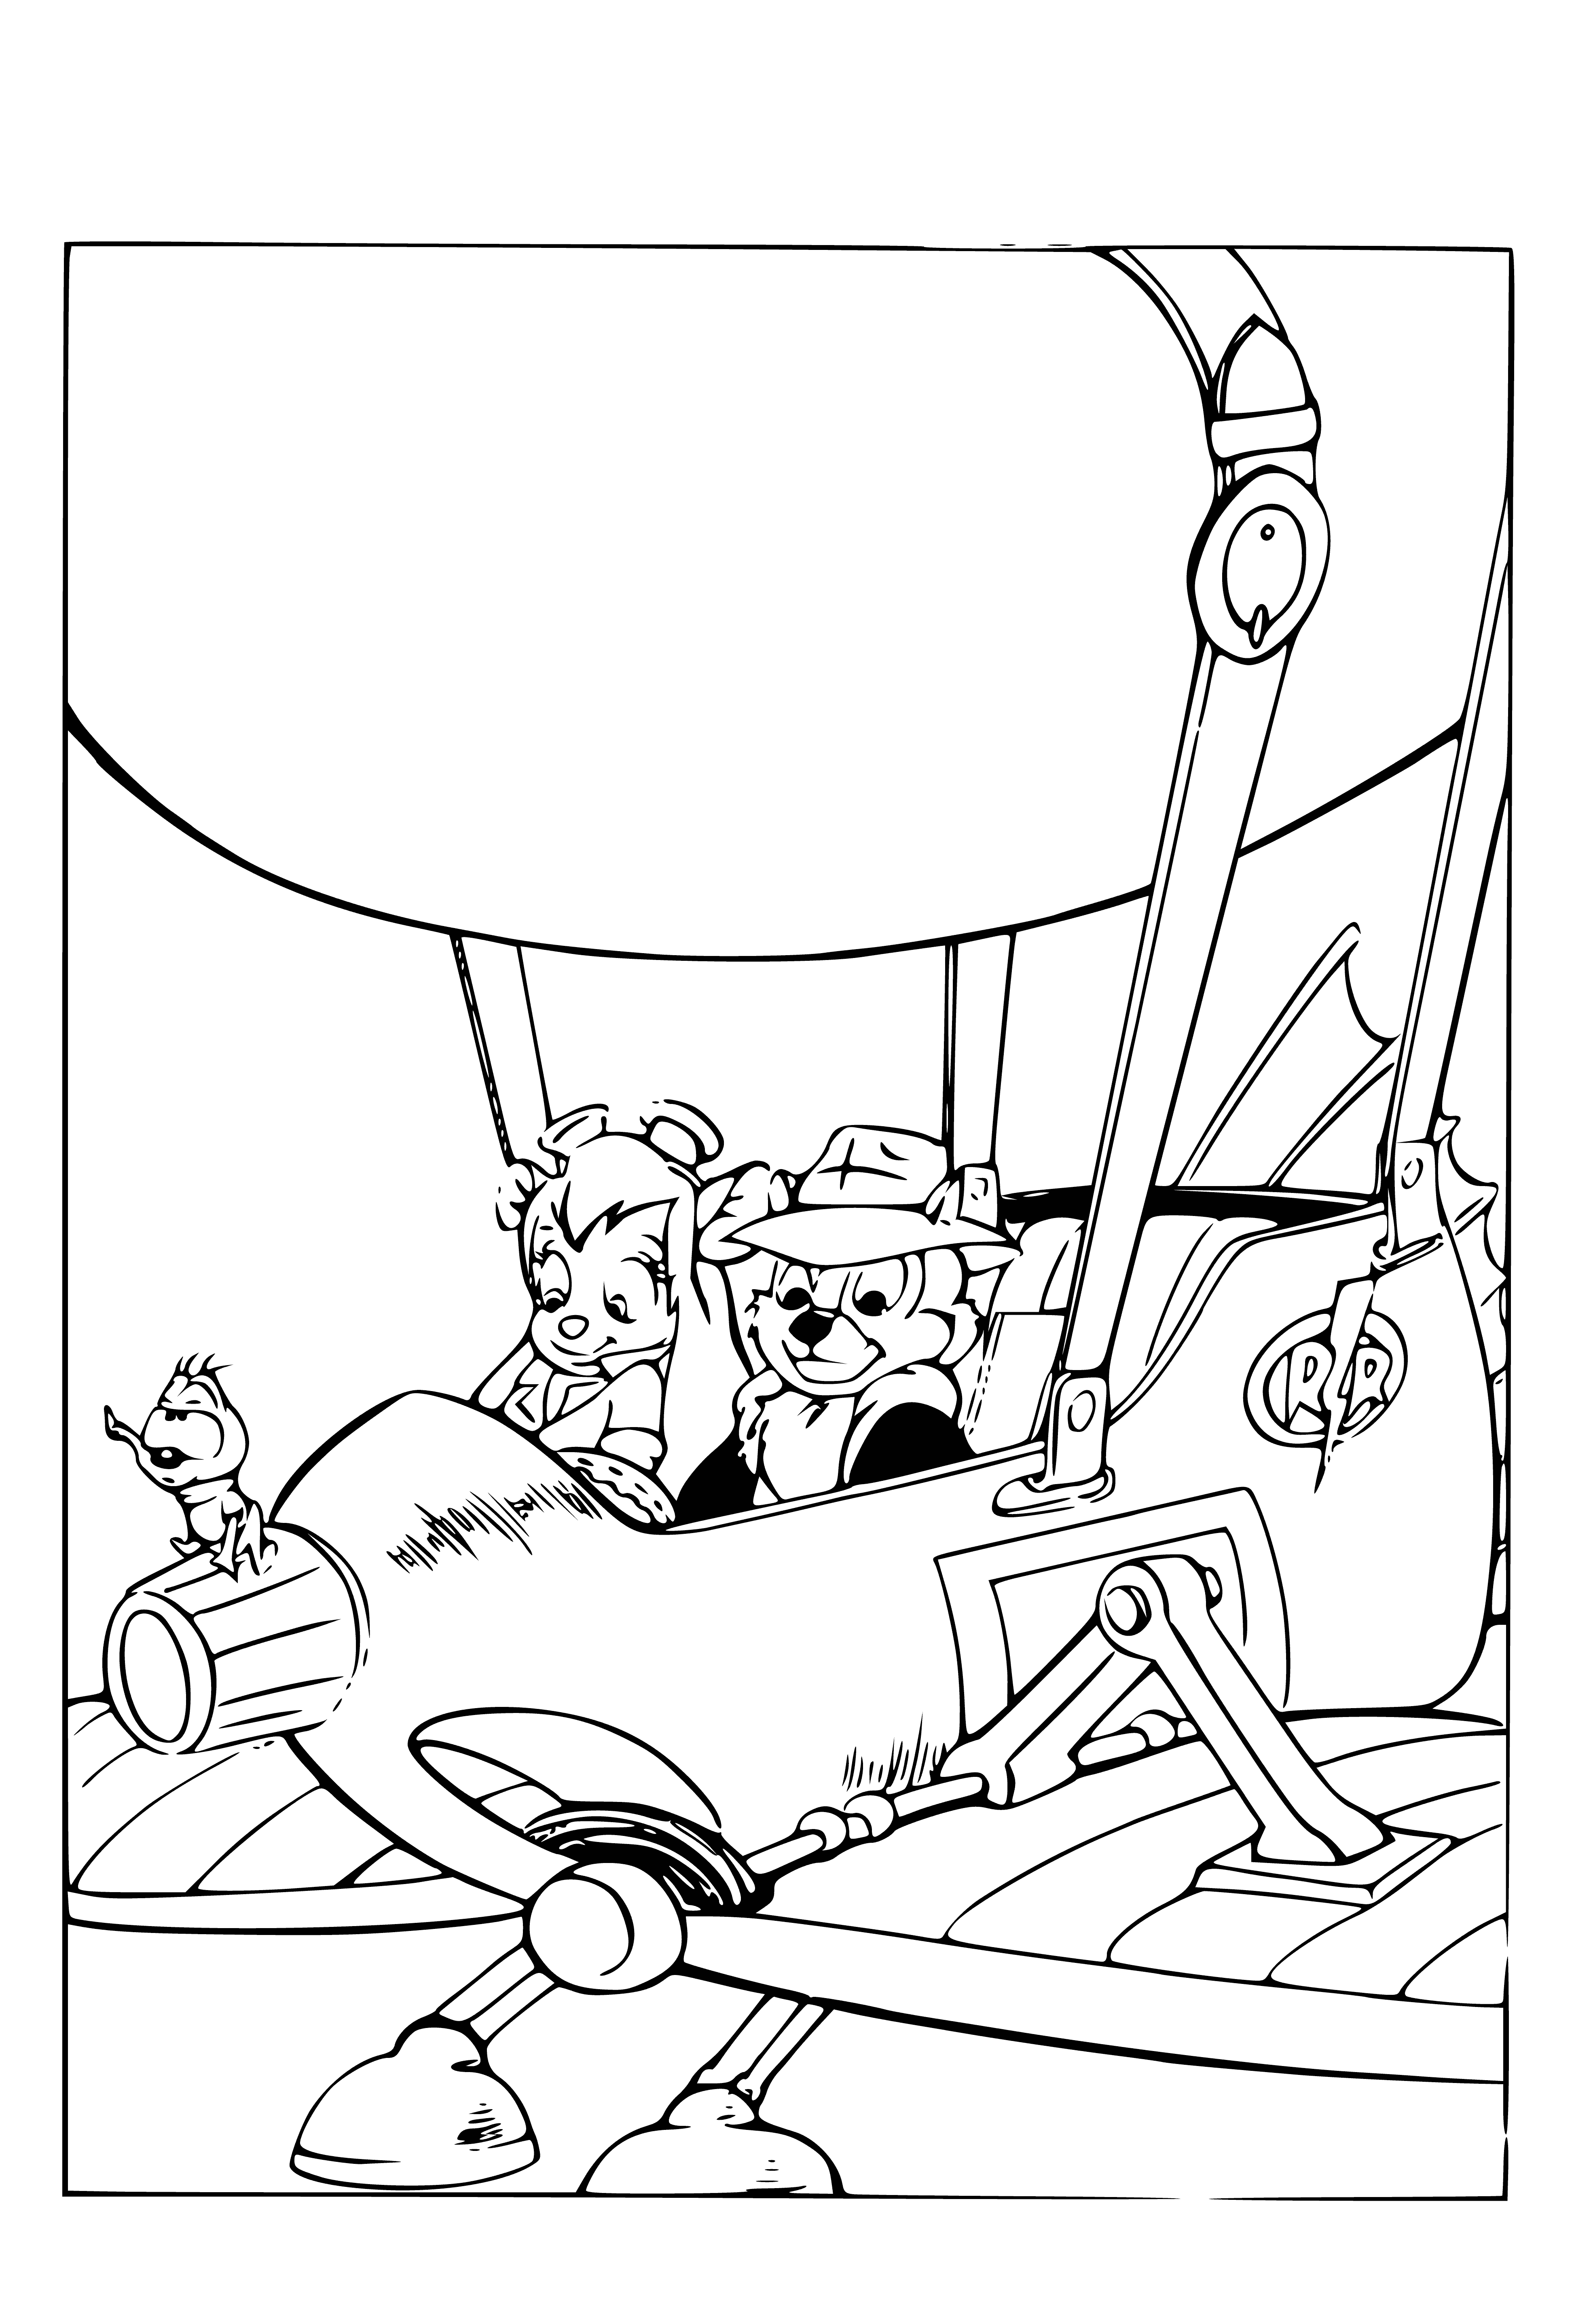 coloring page: Yellow, red, and blue prop plane with a rescue ranger badge and 'RR' on the sides.